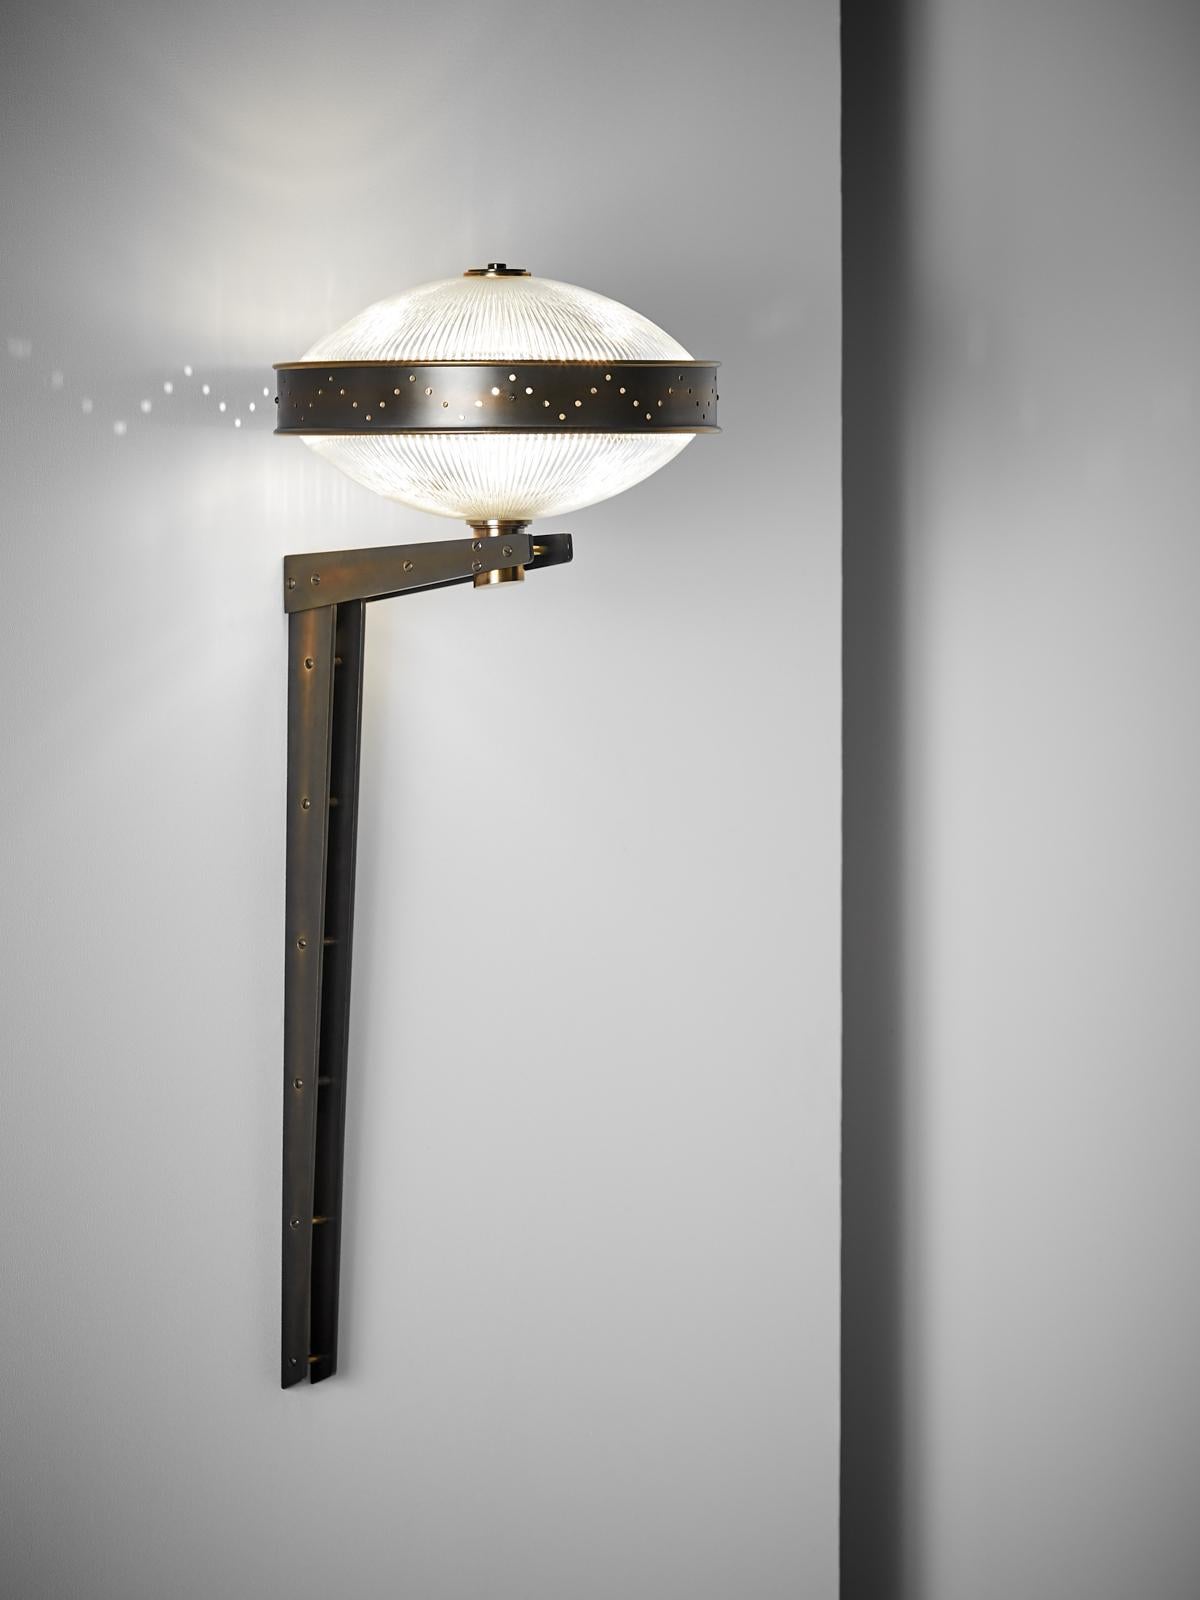 And Objects, product design studio founded by Martin Brudnizki and Nick Jeanes based in London.

Constructed from solid brass and featuring Holophane glass, the Bramdean Wall Light’s tall Industrial frame helps support the counter levering arm on